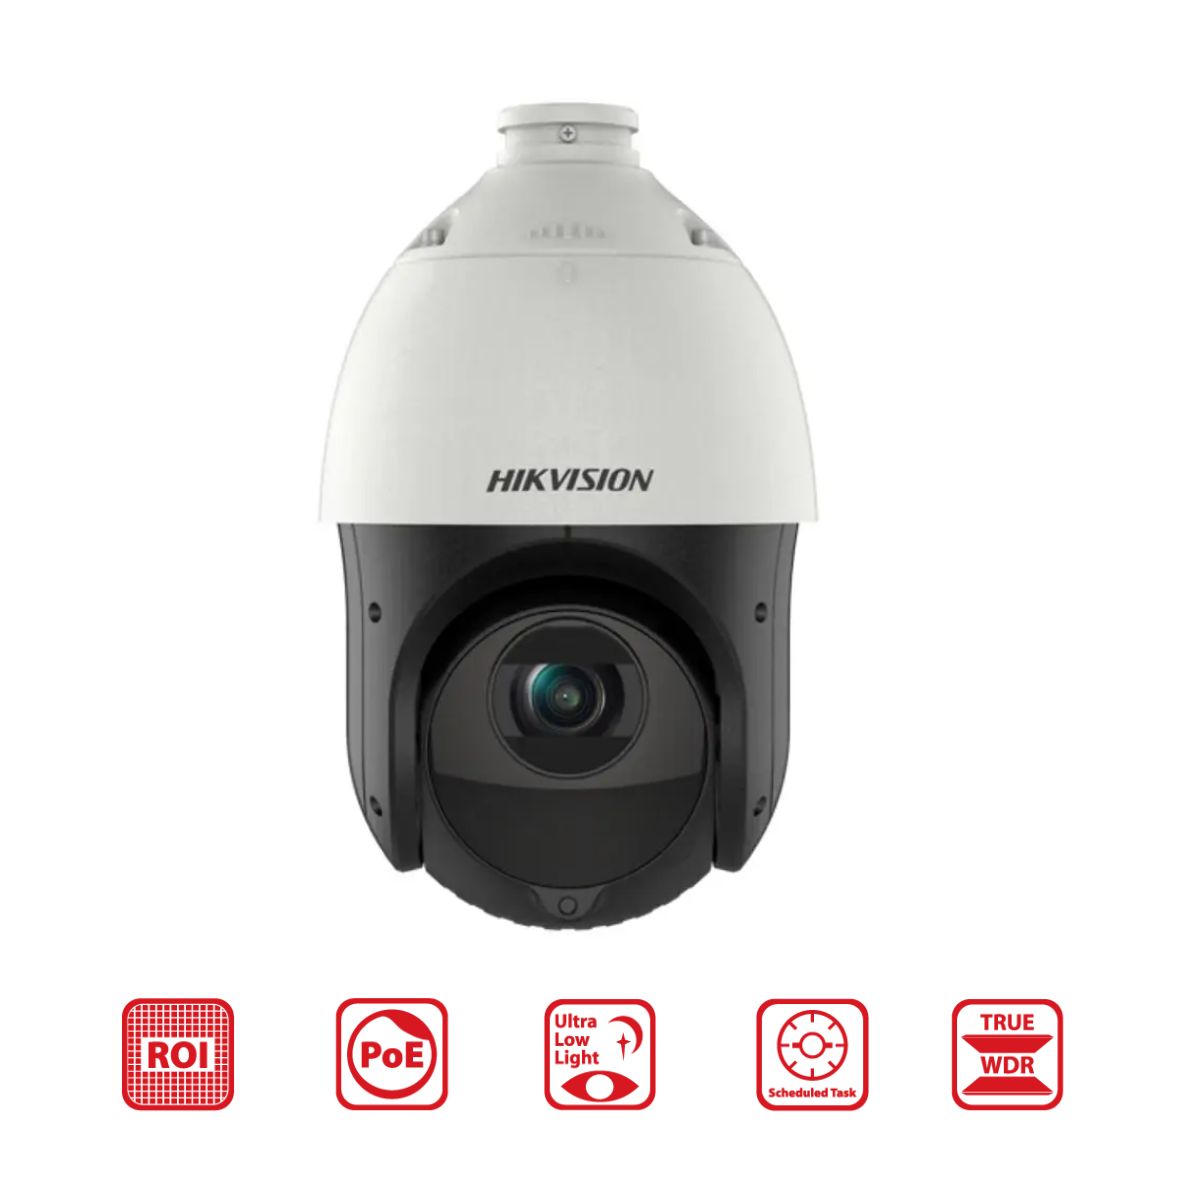 Camera IP Speed Dome Hikvision DS-2DE4225IW-DE (T5) 2MP 1080P, Zoom quang 25X, WDR 120dB